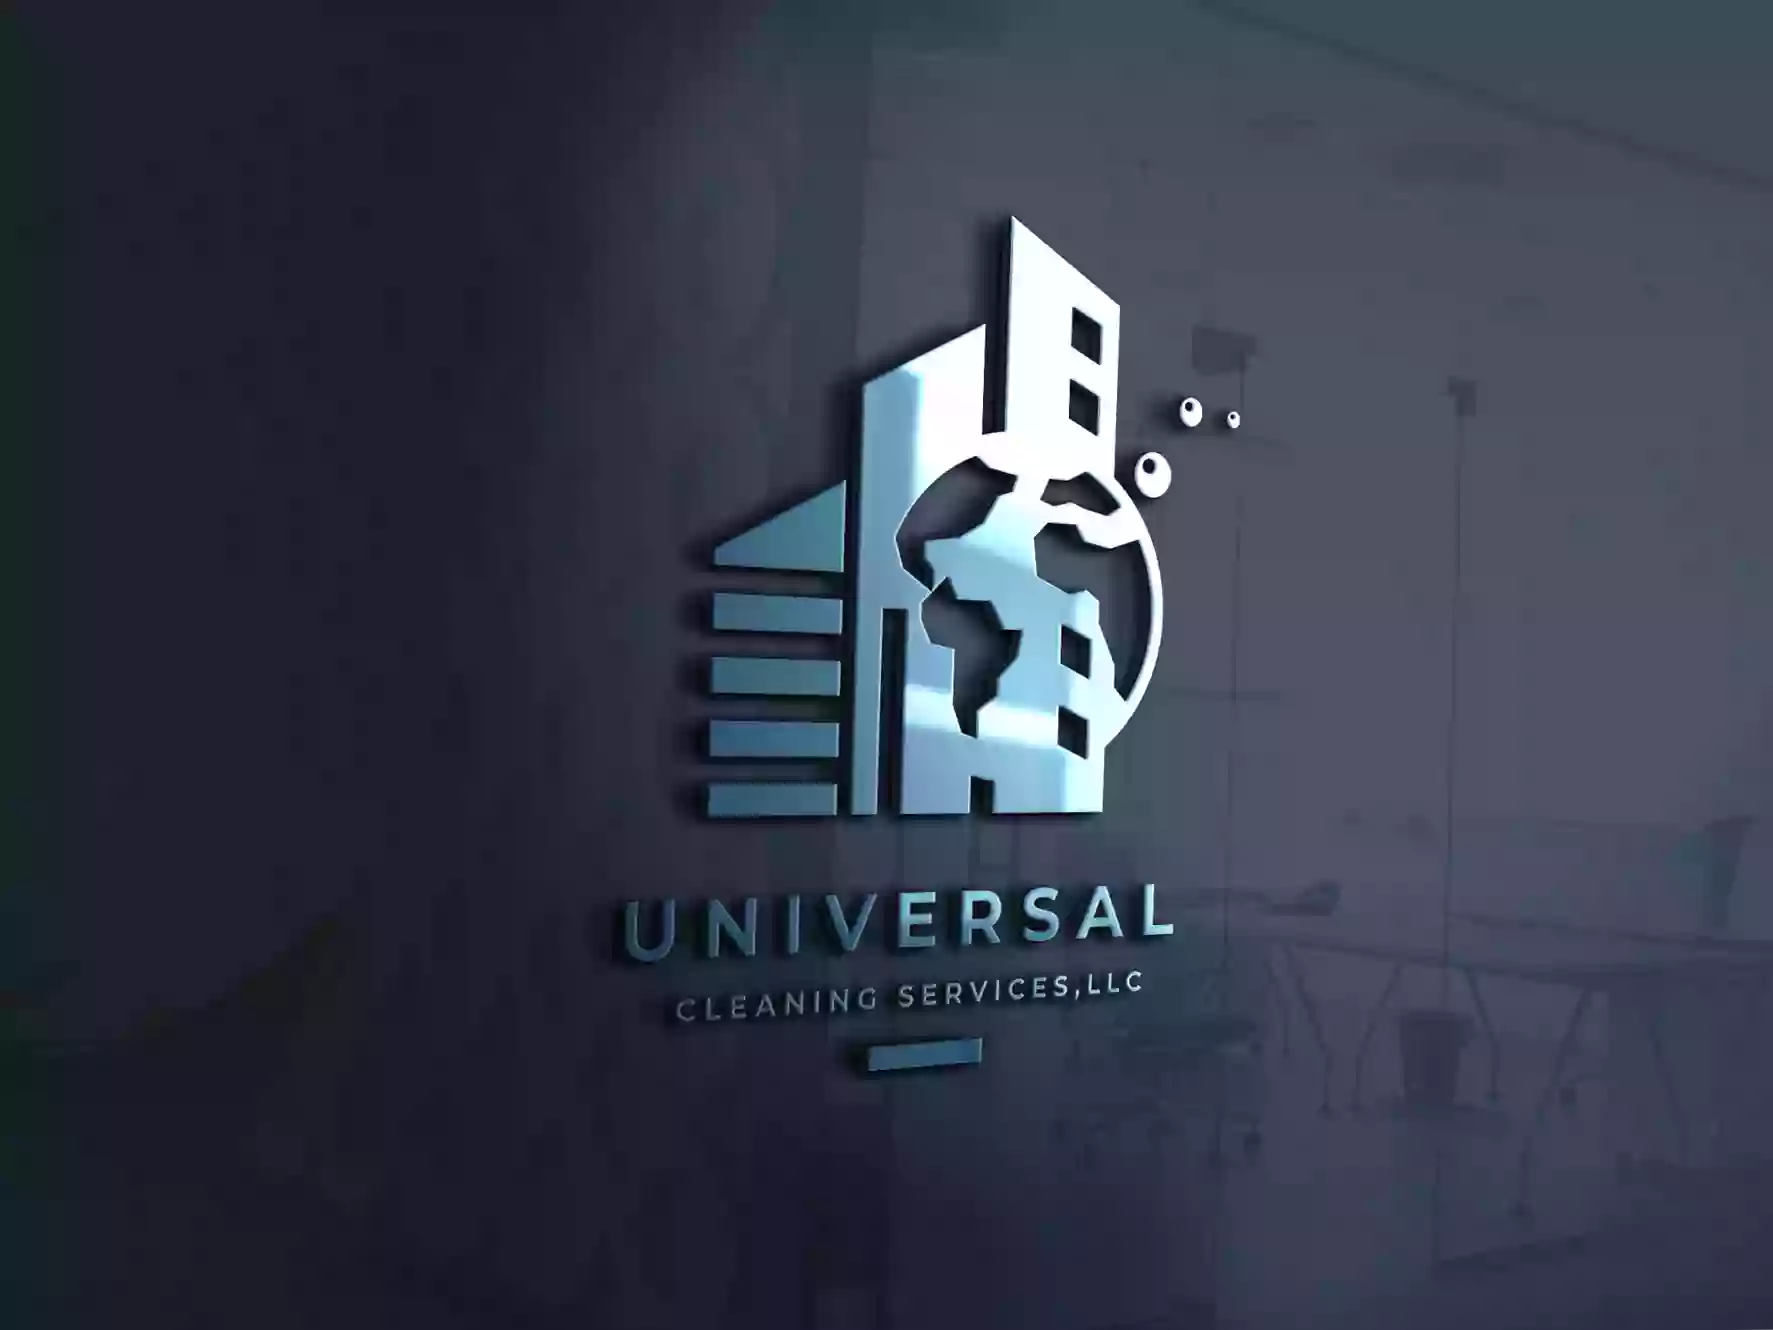 Universal Cleaning Services,LLC